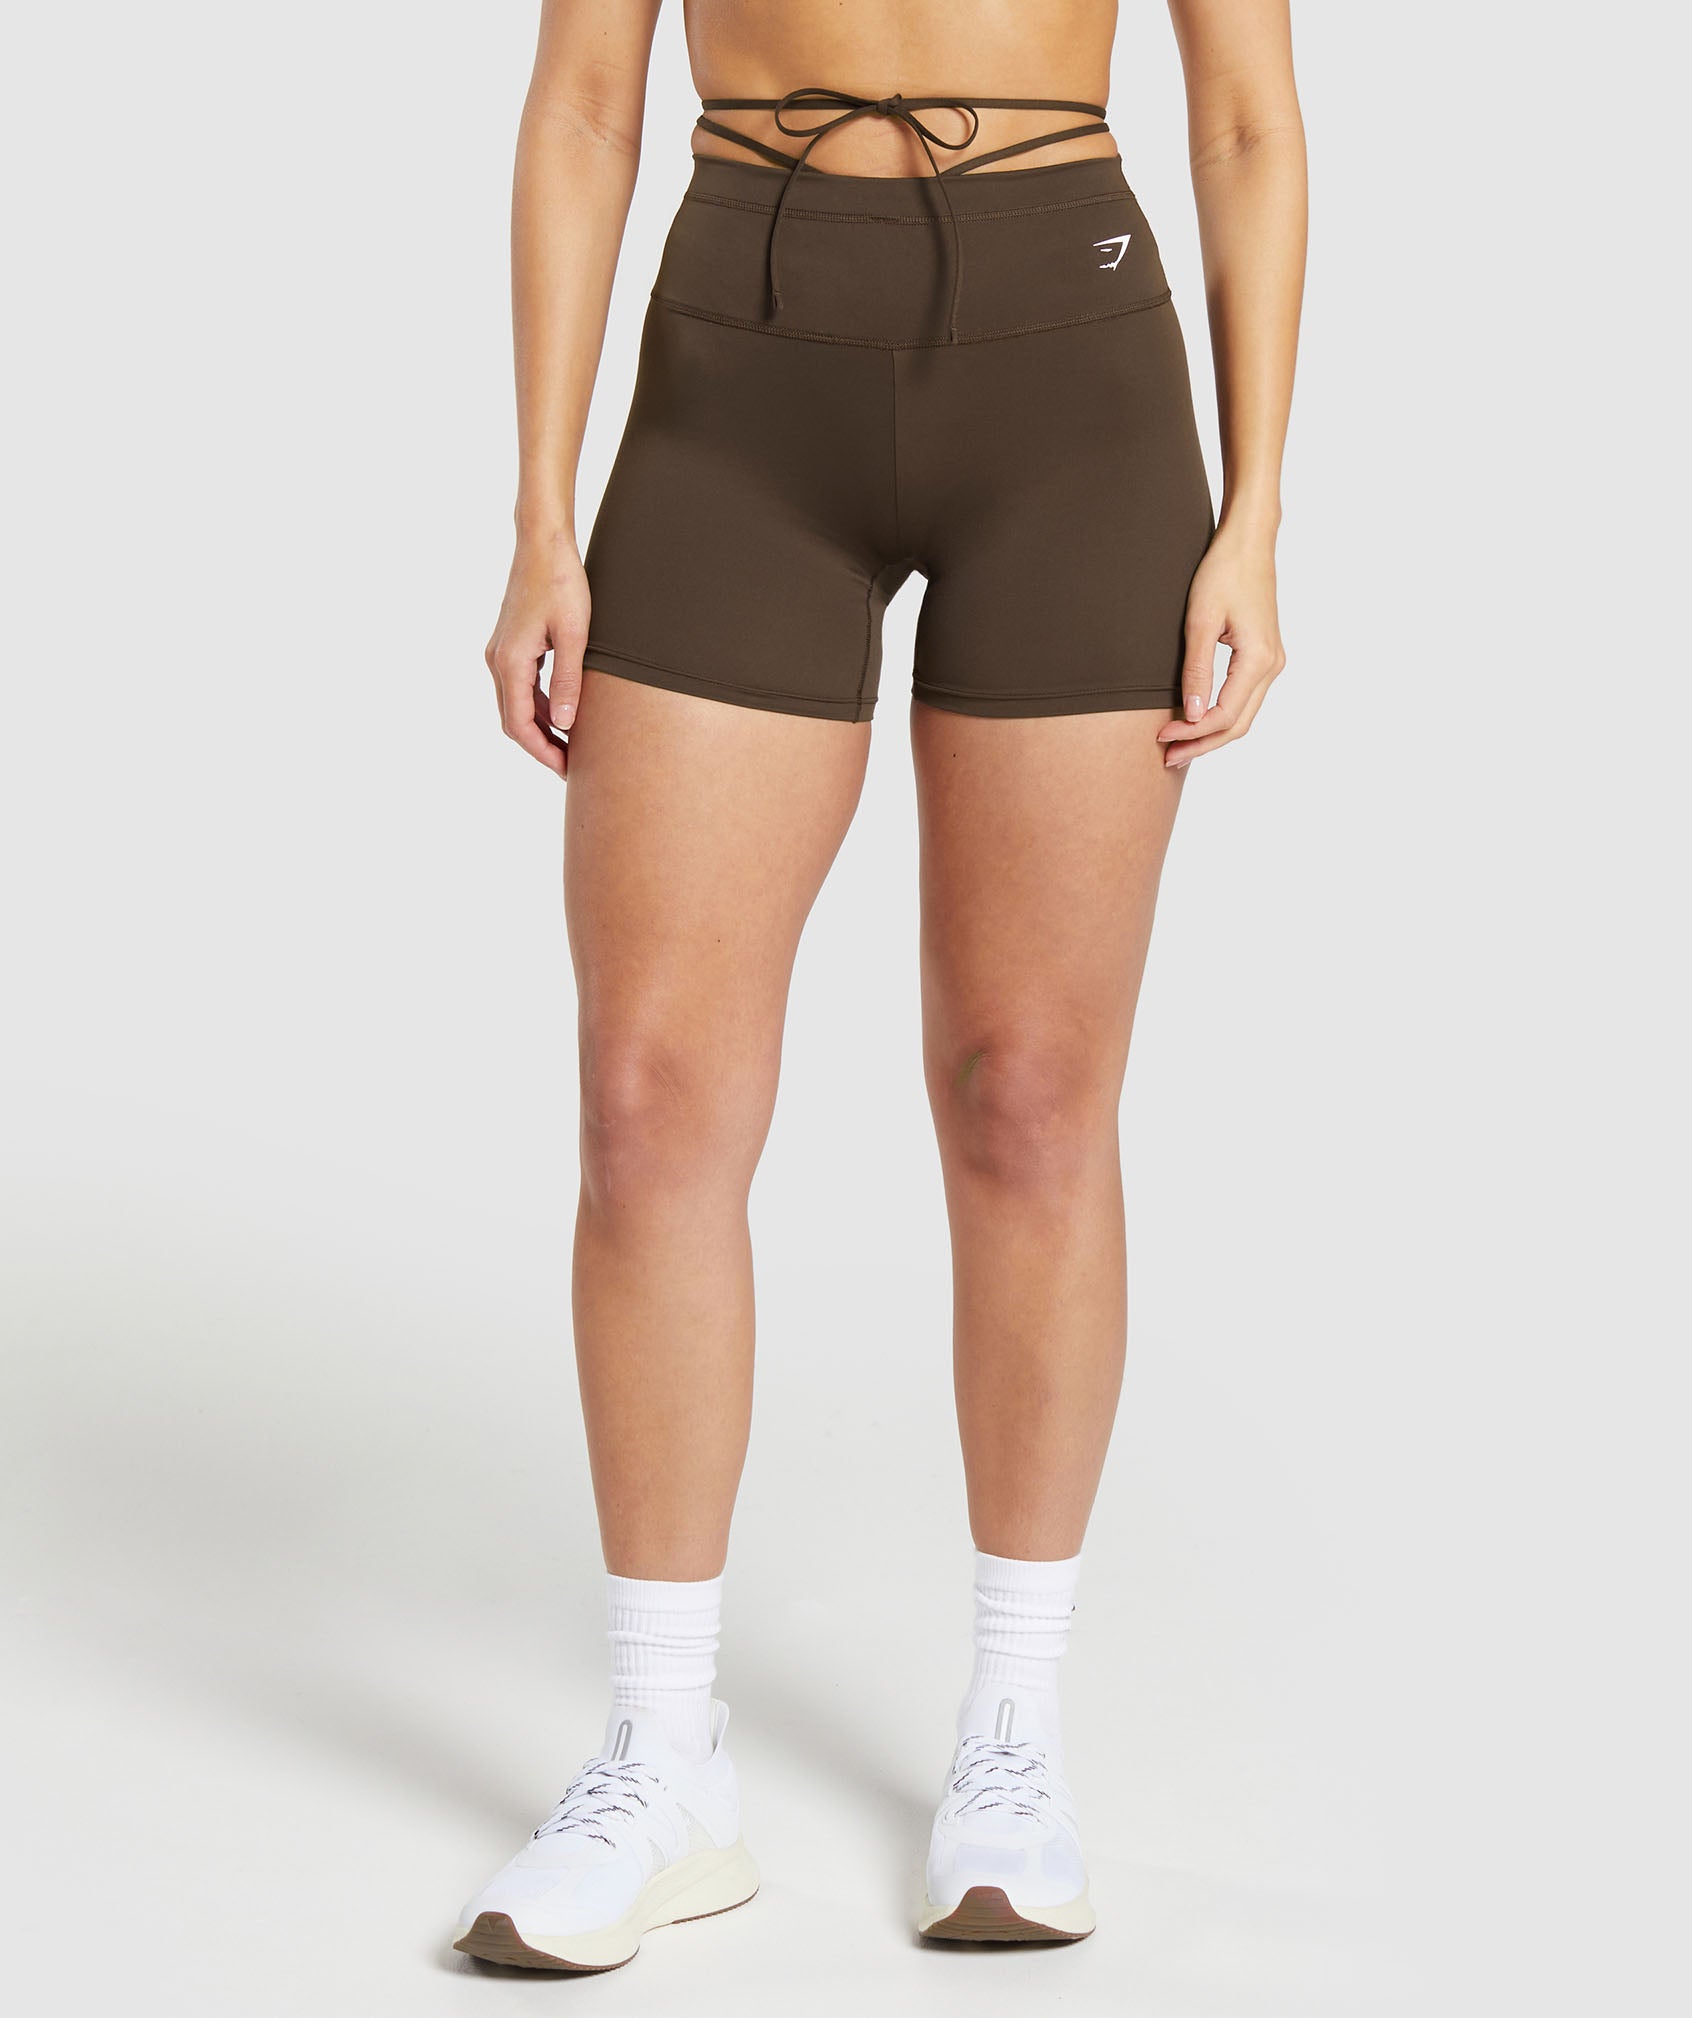 Ribbon Tie Waisted Short in Archive Brown